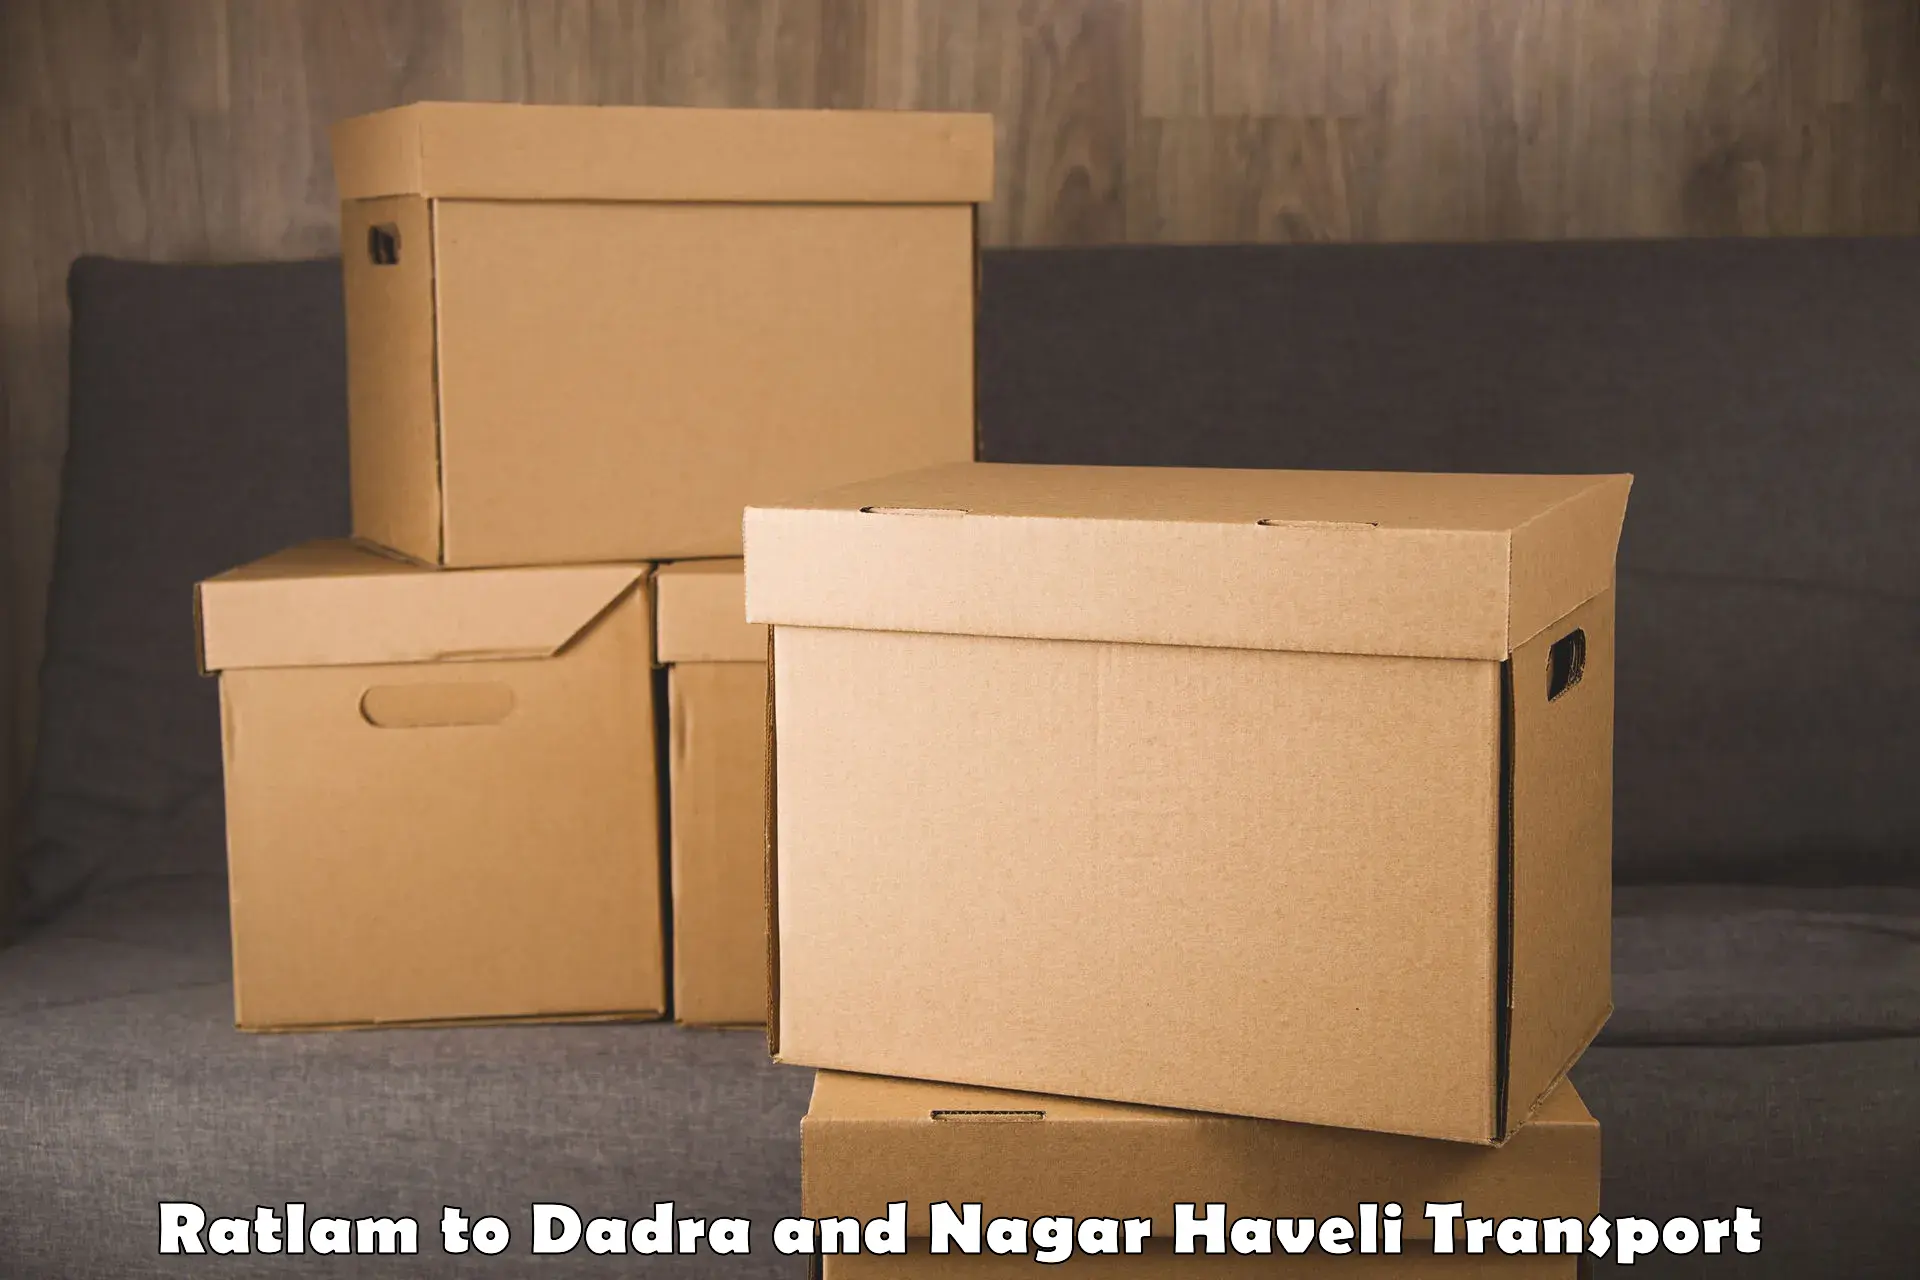 Container transport service Ratlam to Dadra and Nagar Haveli